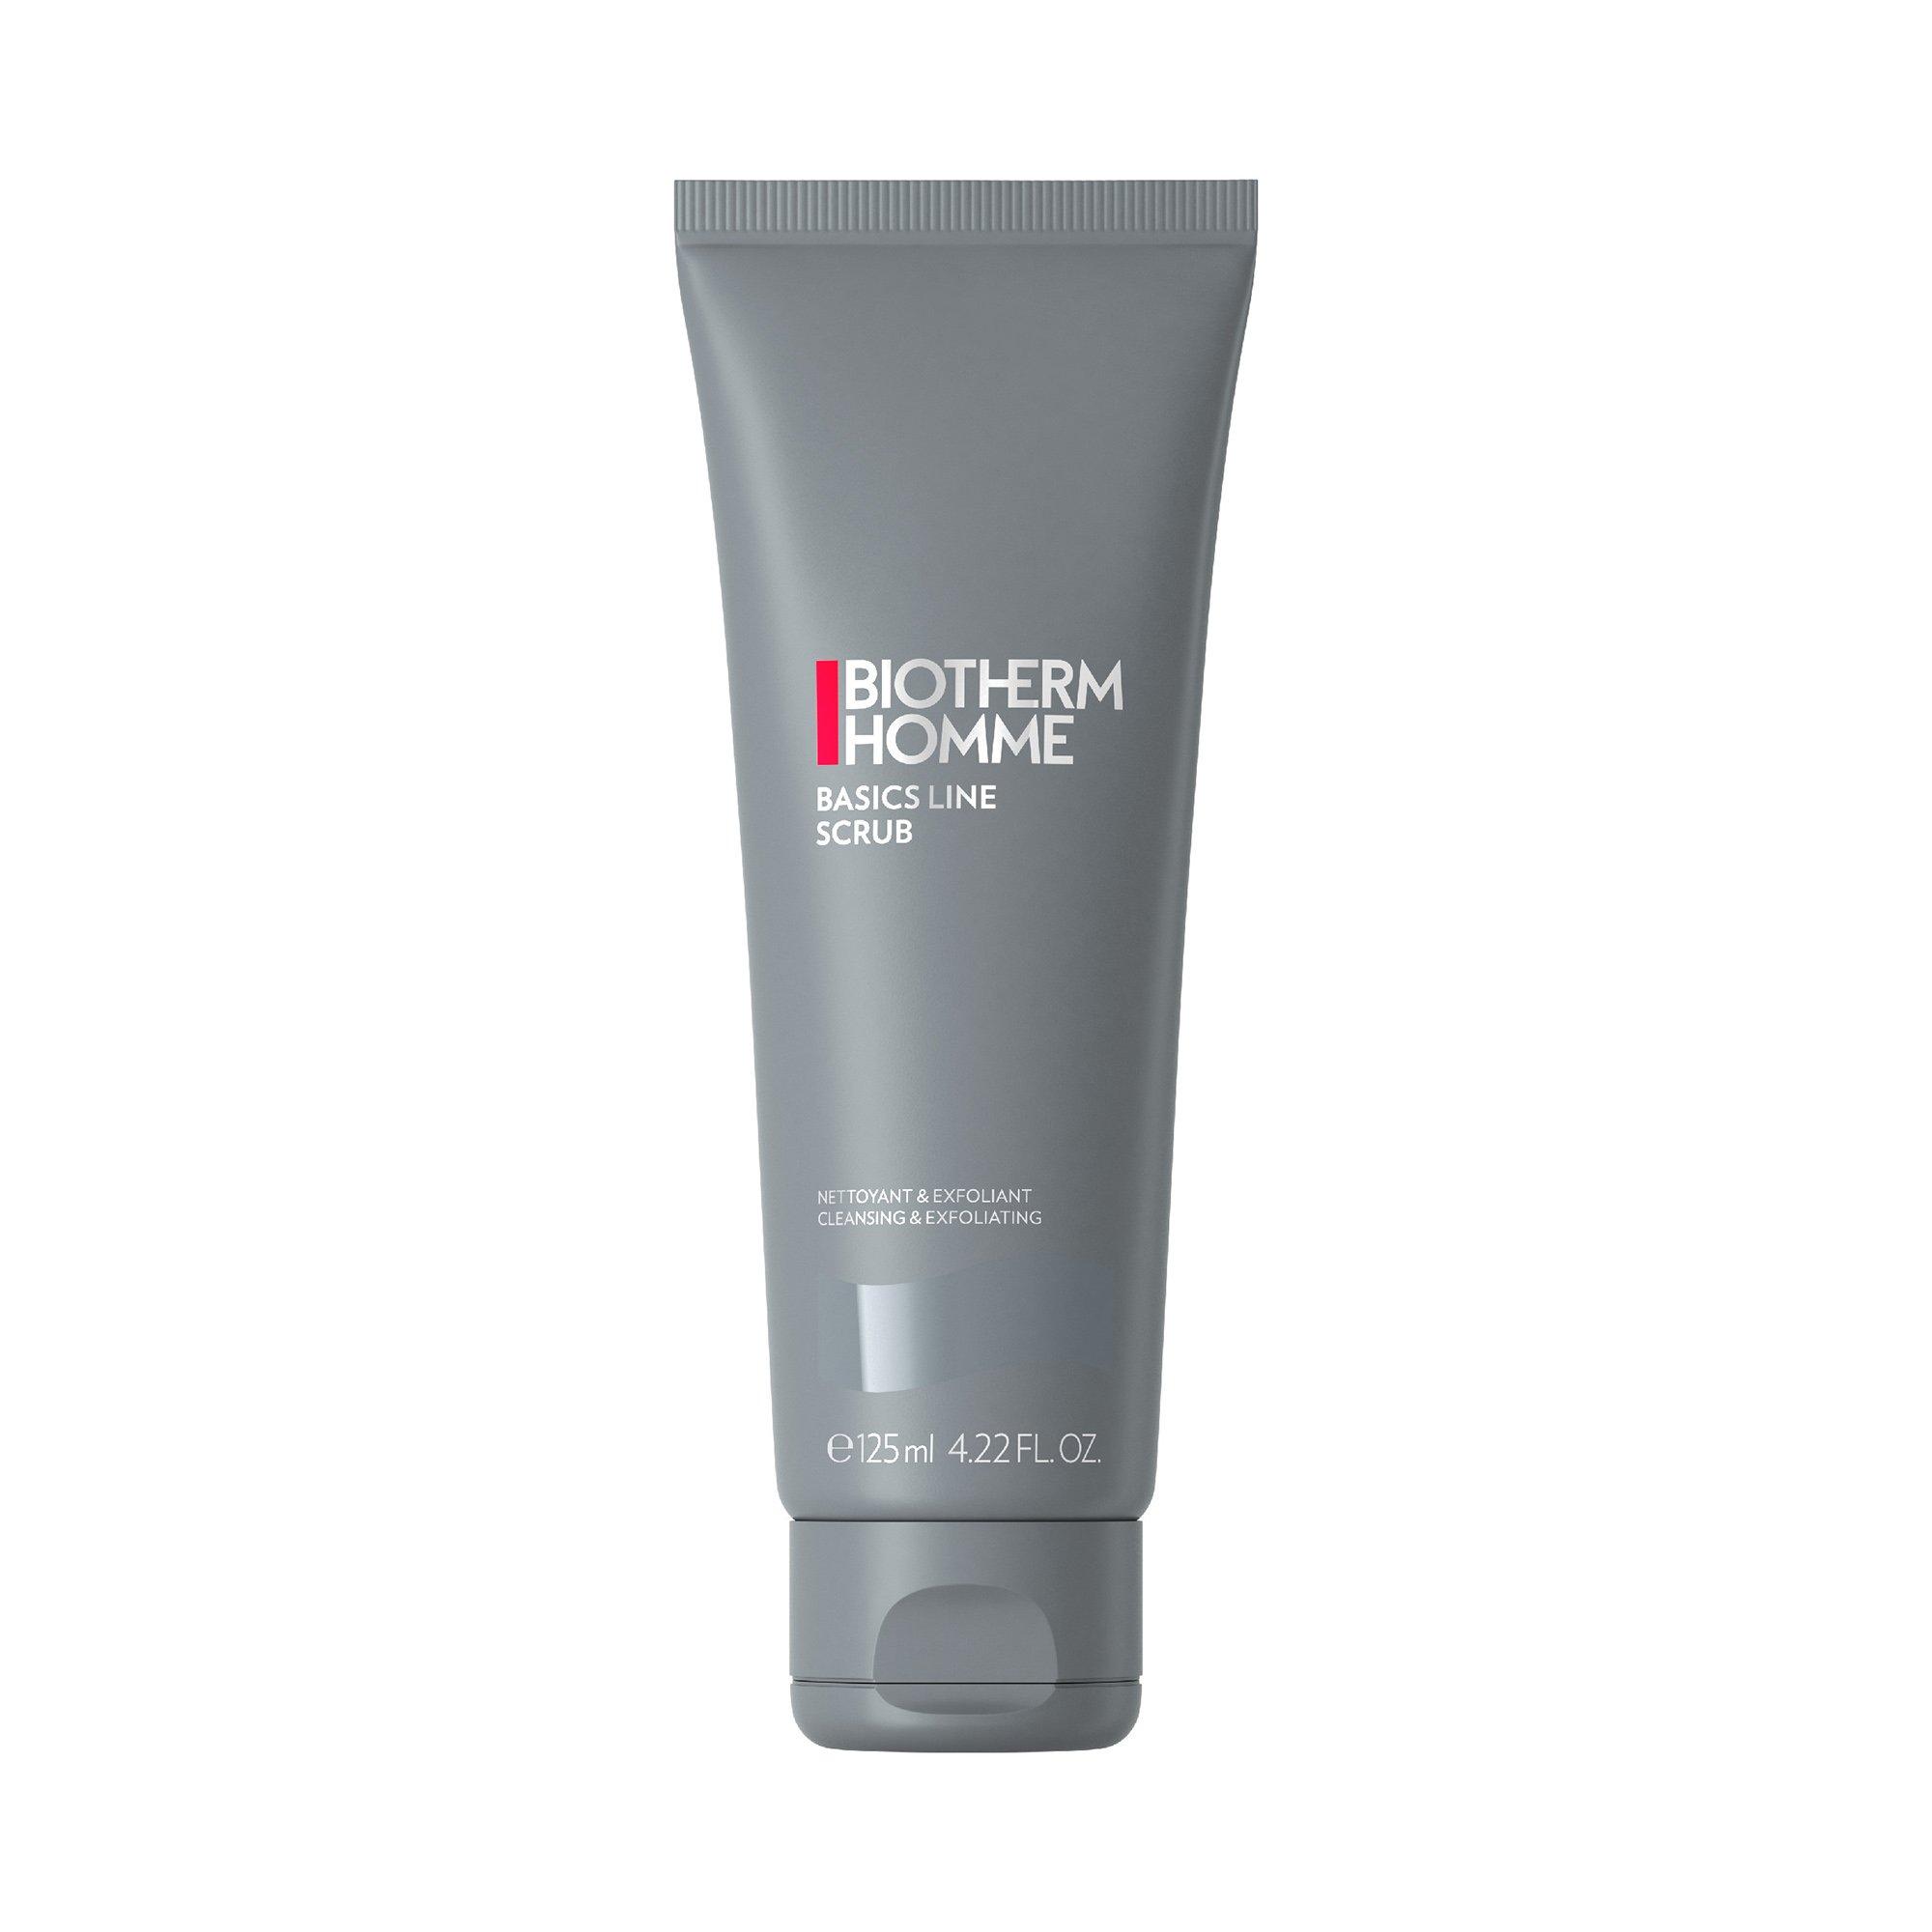 Image of BIOTHERM Homme Facial Scrub - 125ml